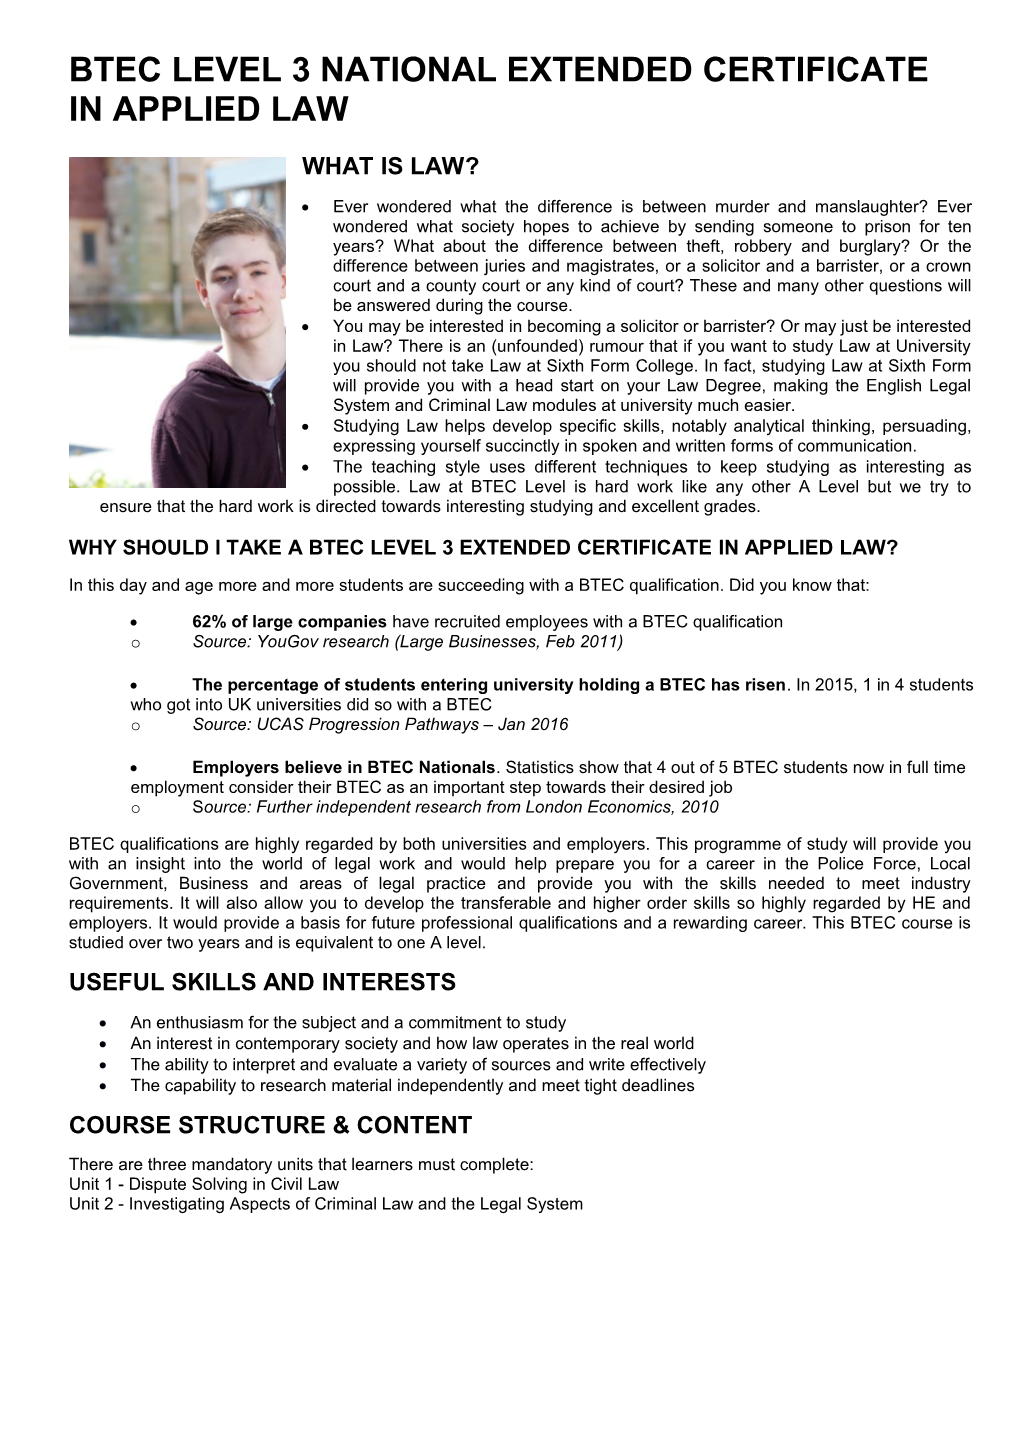 BTEC Level 3 National Extended Certificate in Applied Law